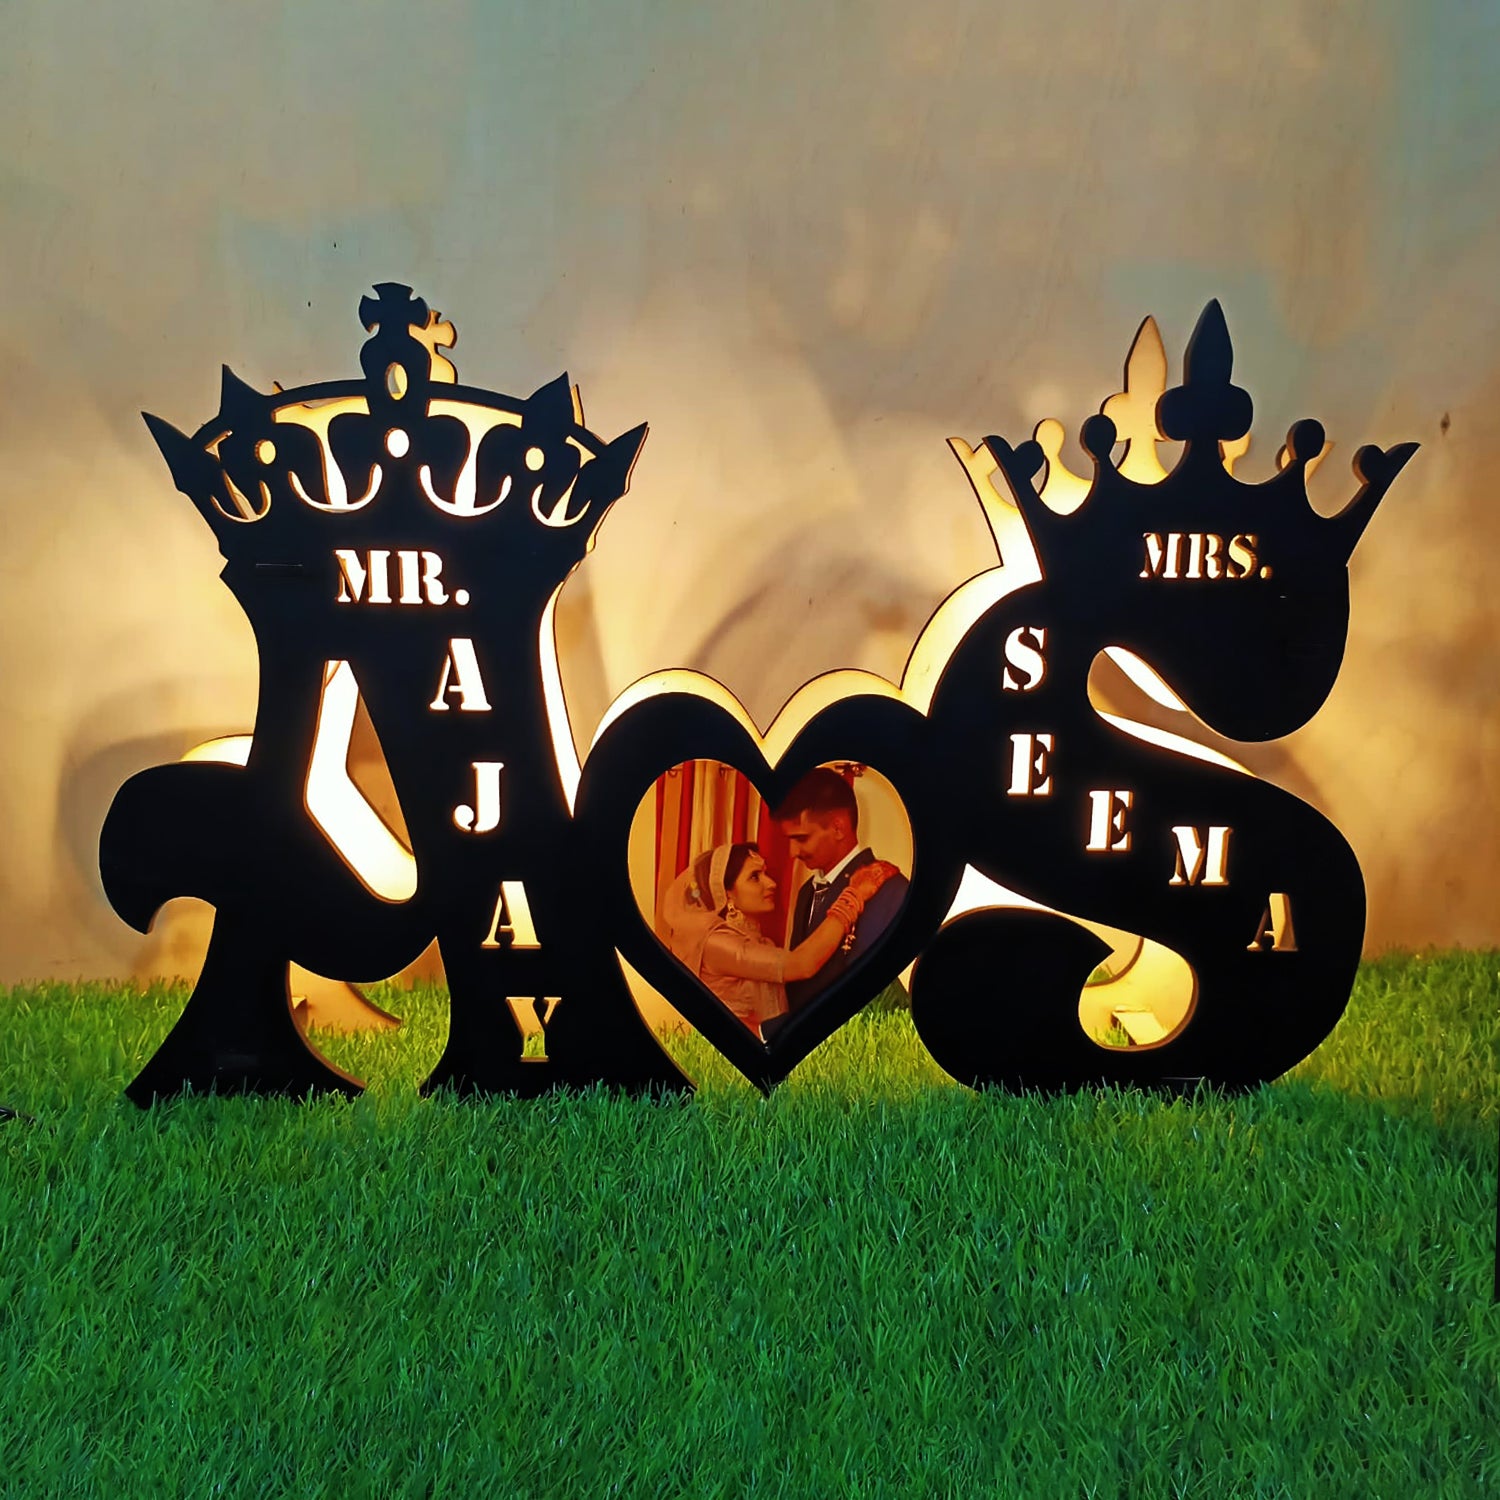 Couple Monogram with light -Wooden Name LED Lamp Can Customized with Any Name